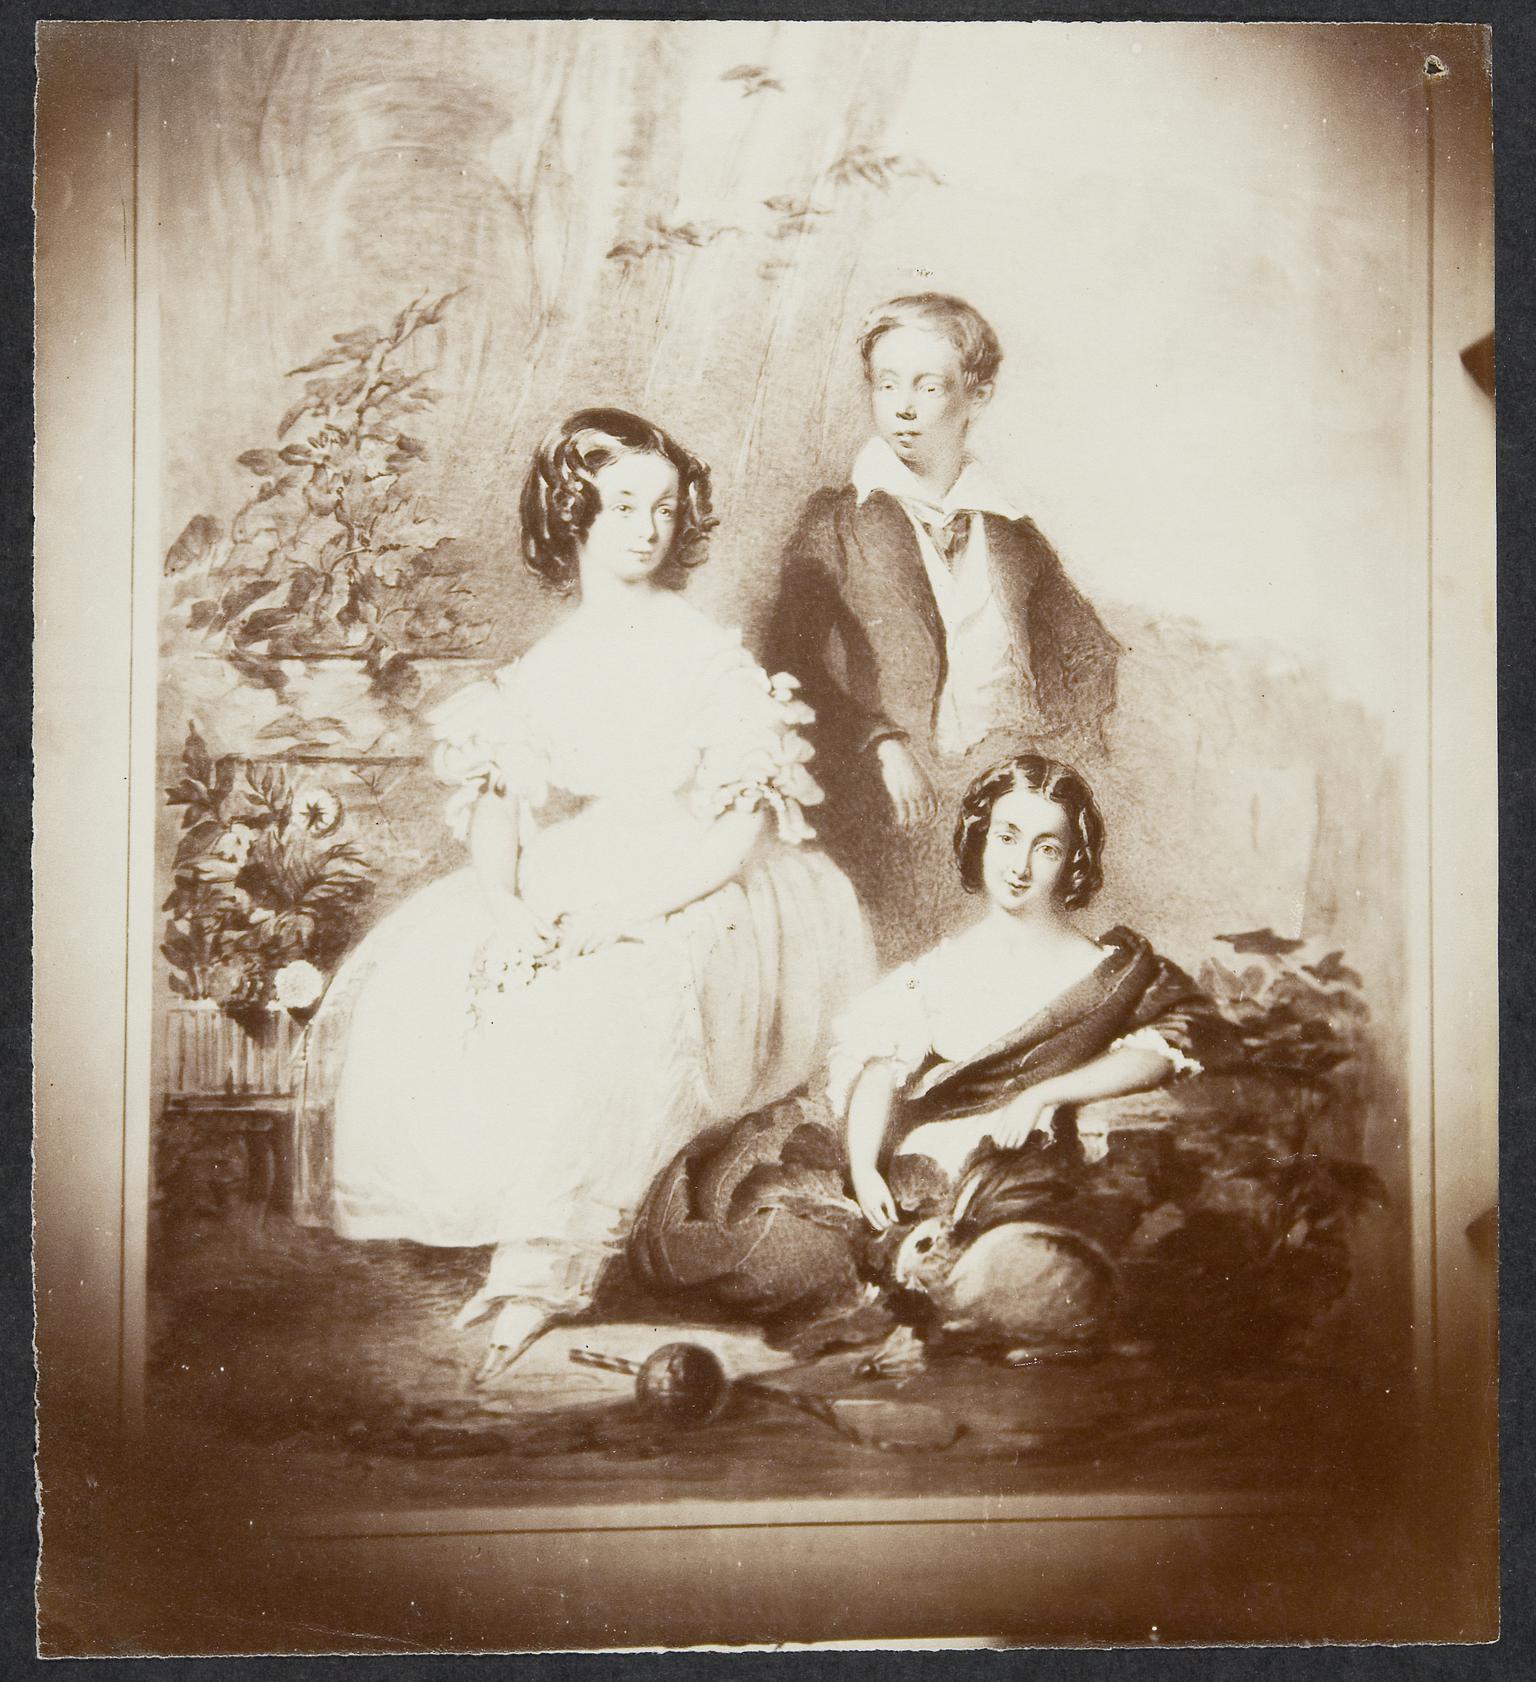 William Beach and sisters, photograph